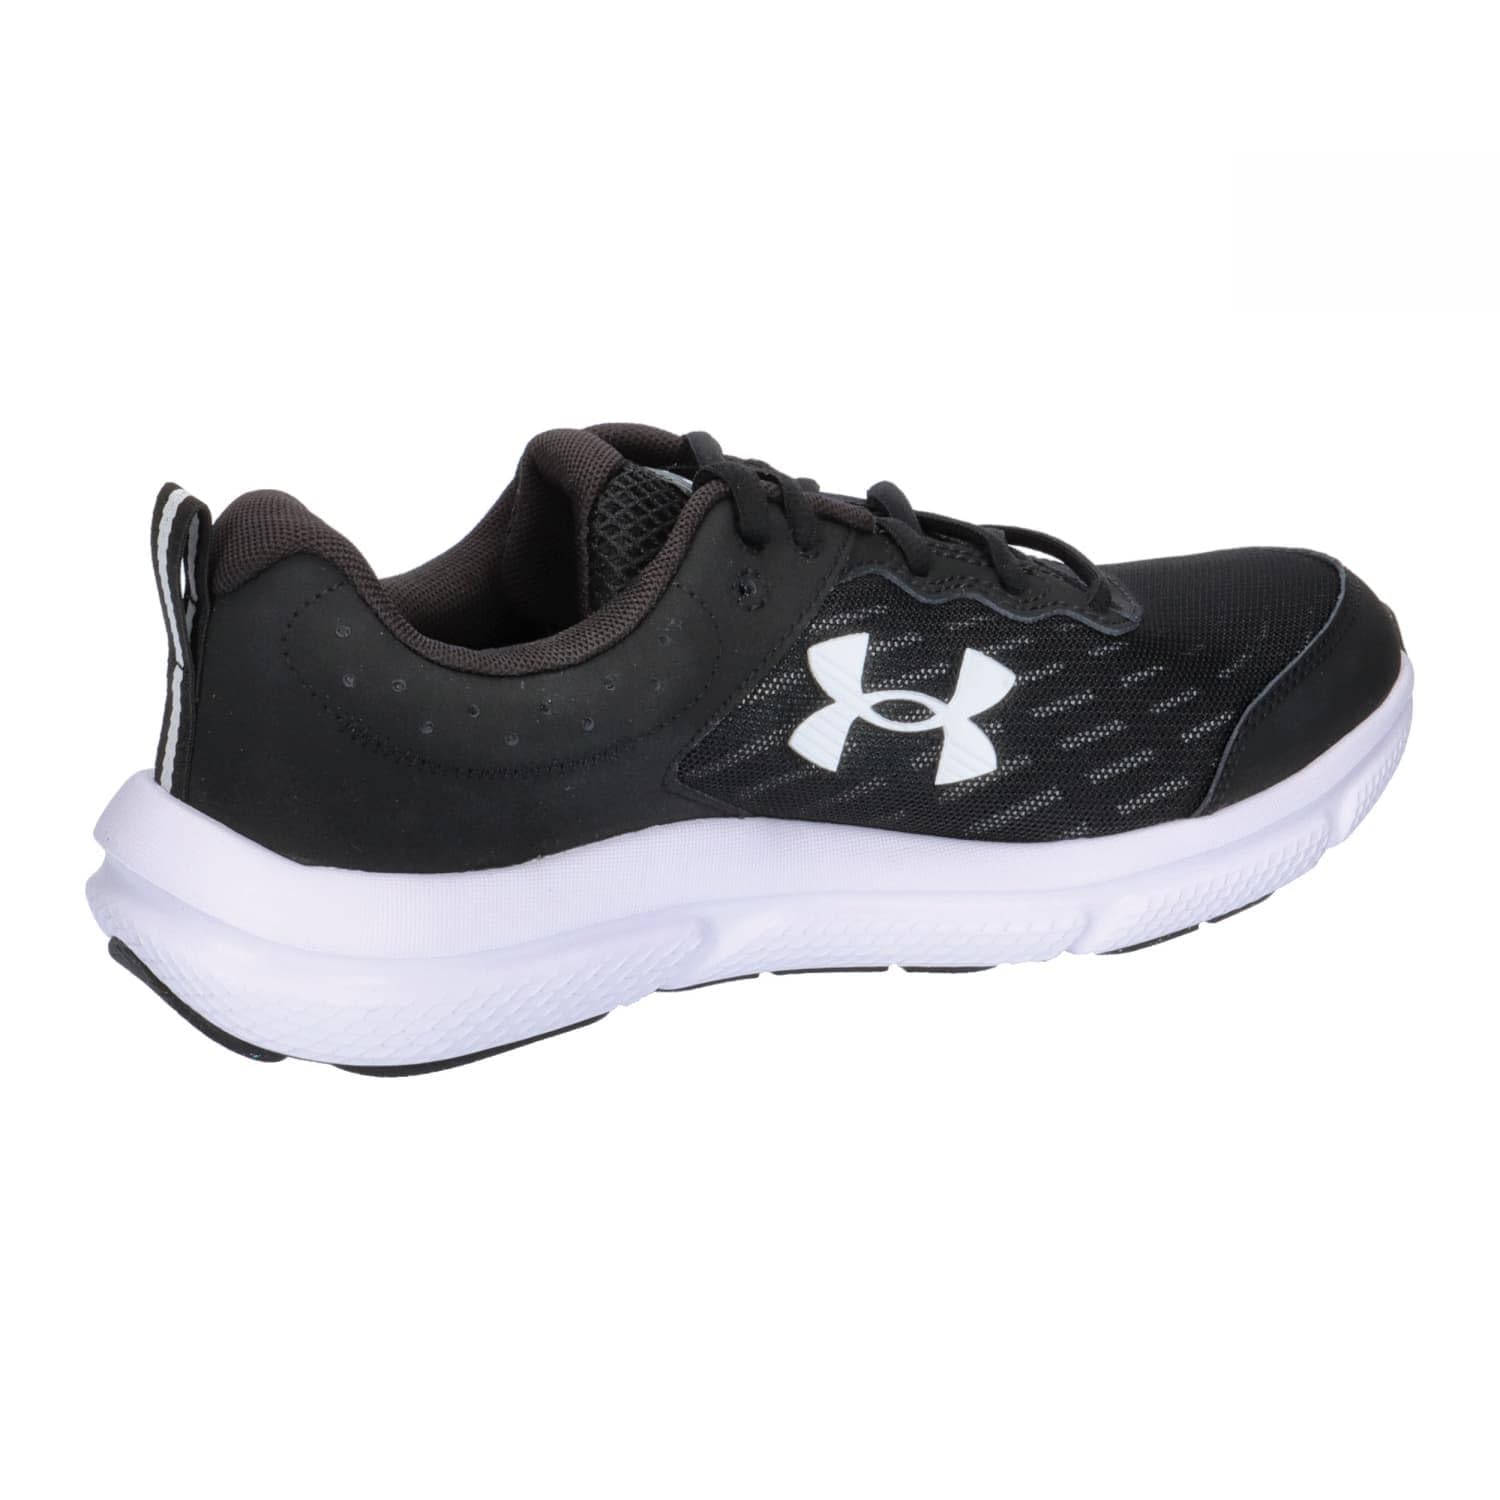 Under Armour mens Charged Assert 10